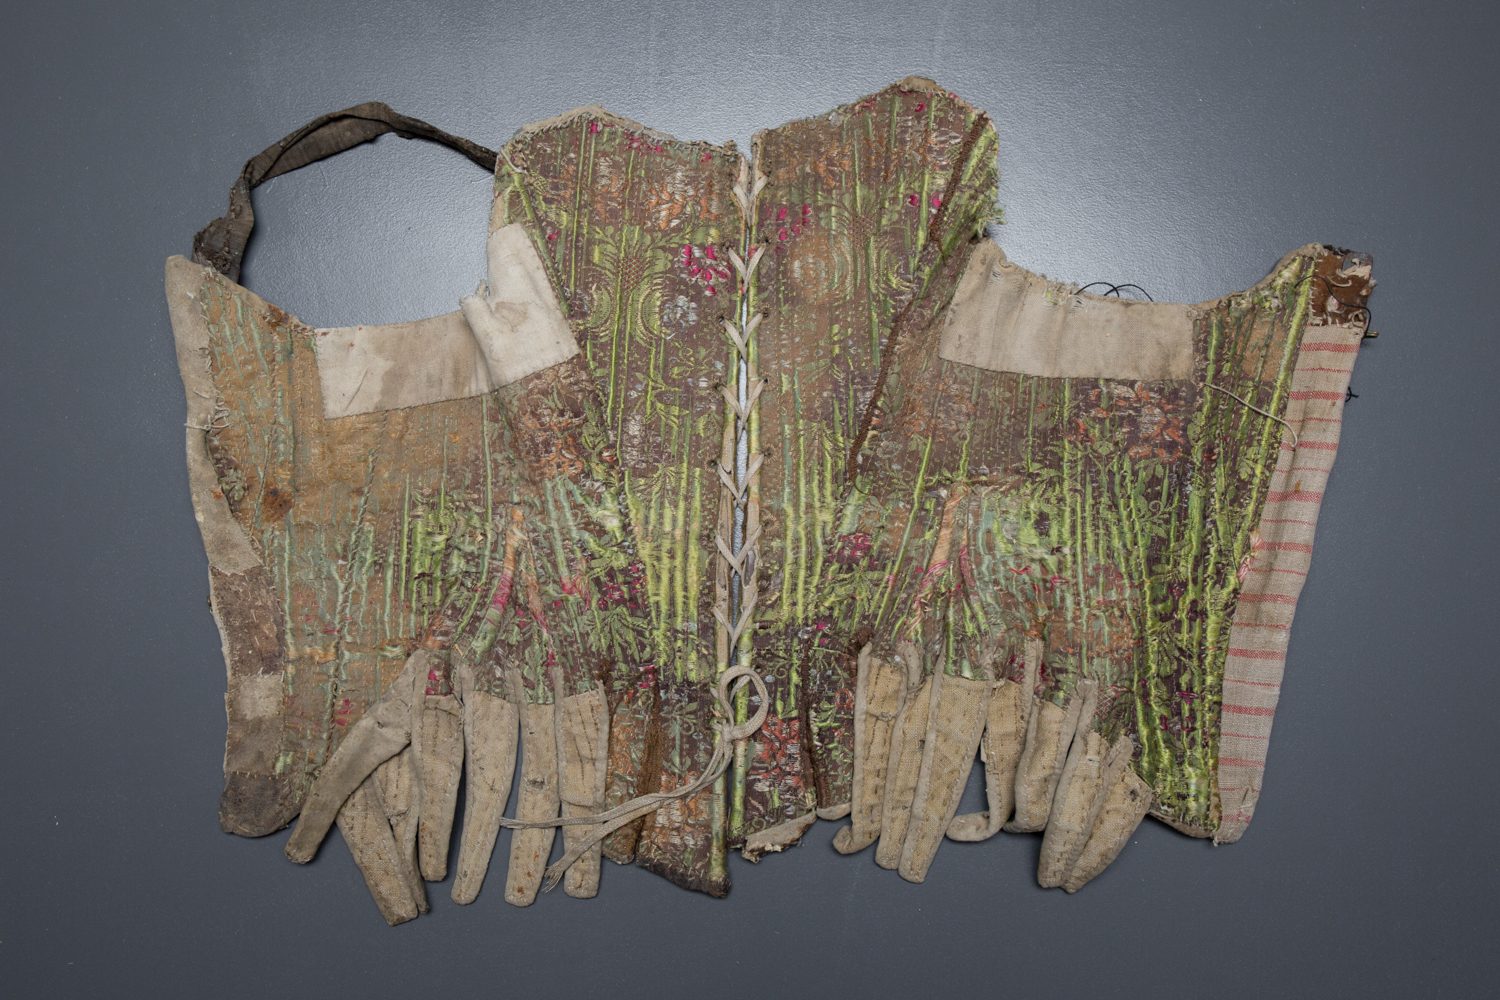 Silk Brocade Whaleboned Stays, c. 1770s, Austria. The Underpinnings Museum. Photography by Tigz Rice.